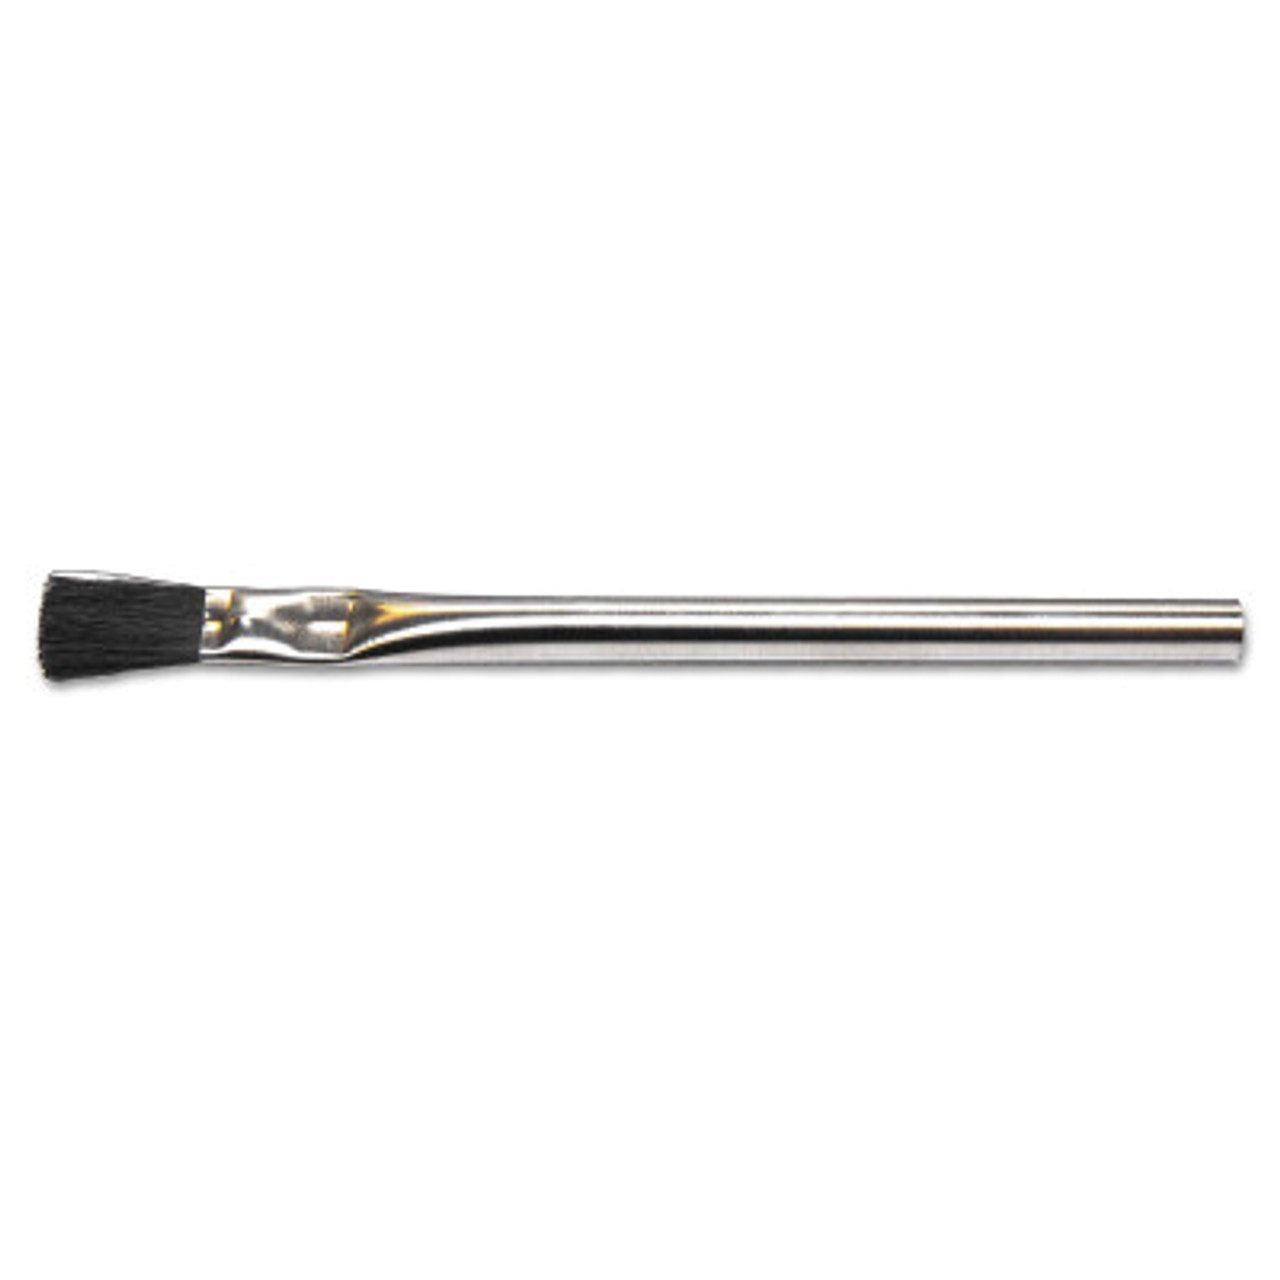 Anchor Products Acid Brushes, 1/4 in Thick x 1/2 in Wide, Horsehair, Tin  Handle, 144 GS